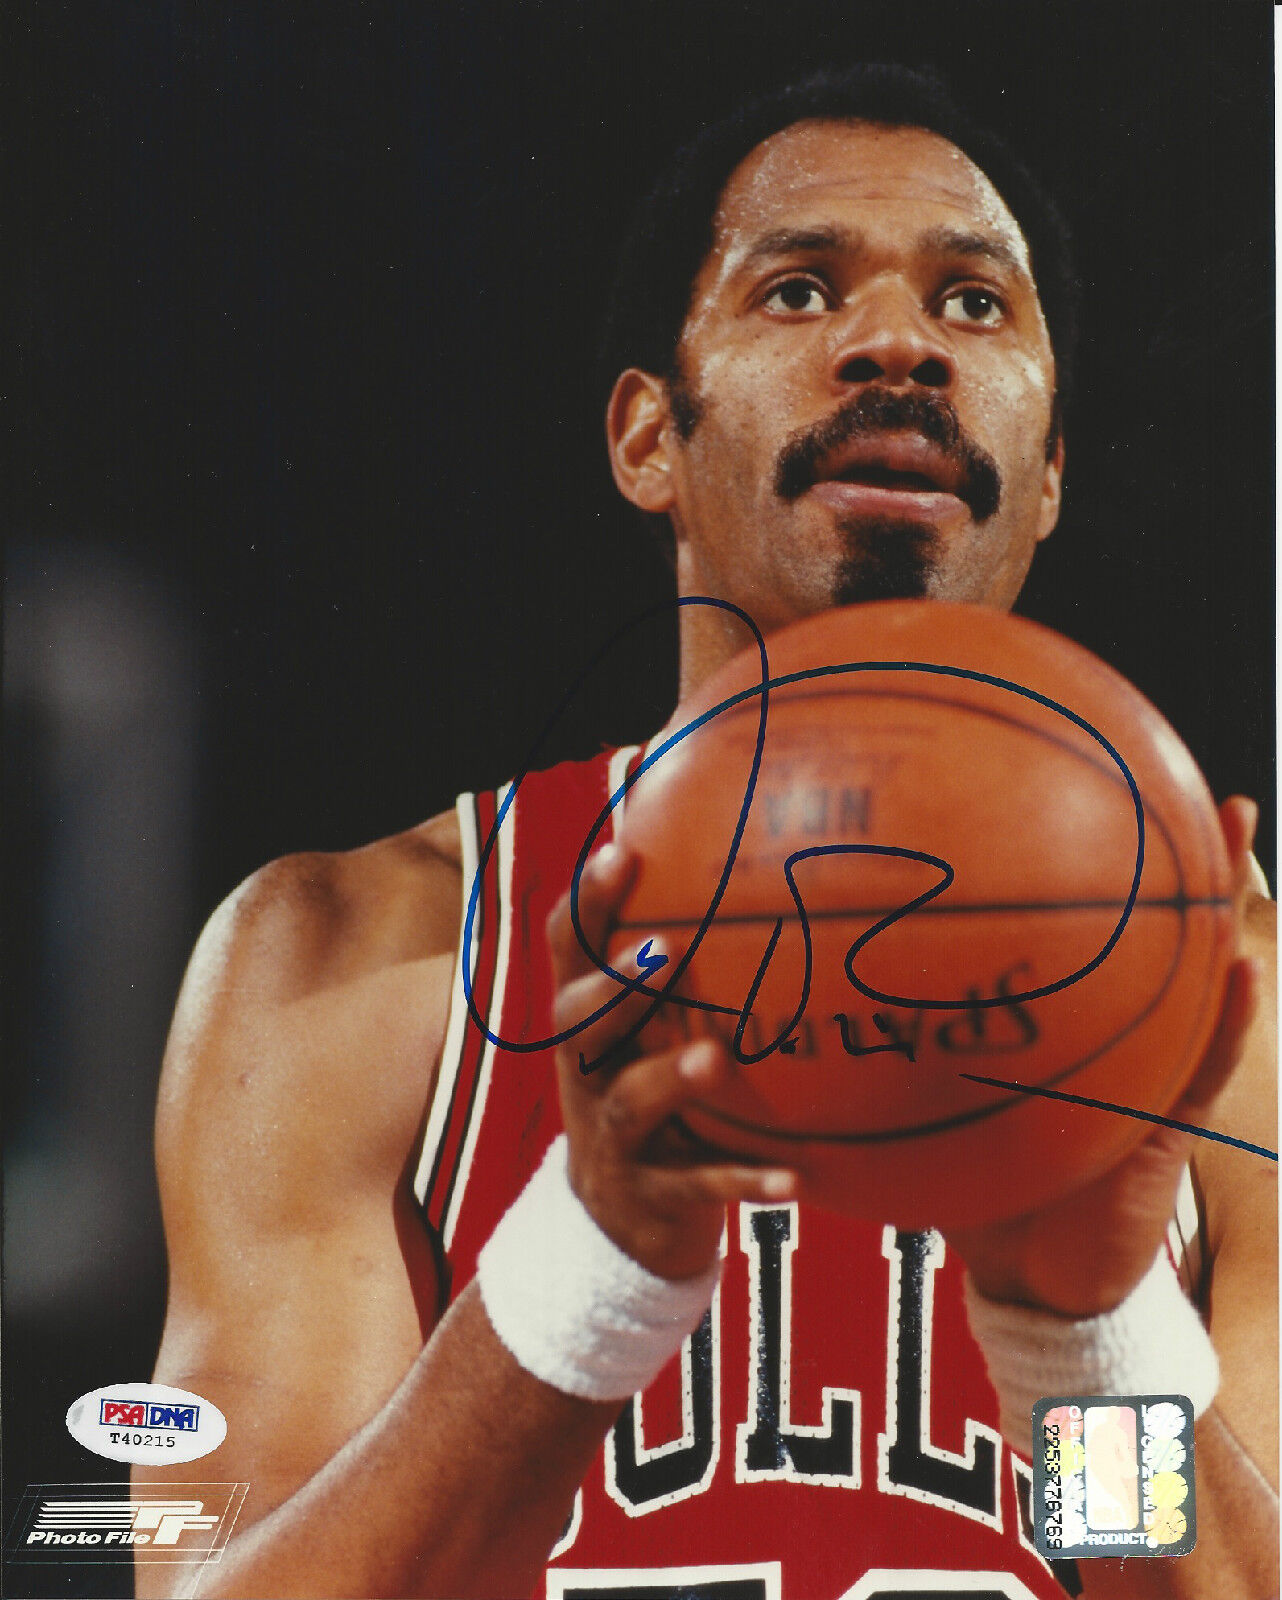 ARTIS GILMORE (Chicago BULLS) Signed 8 x10 Photo Poster painting with PSA COA